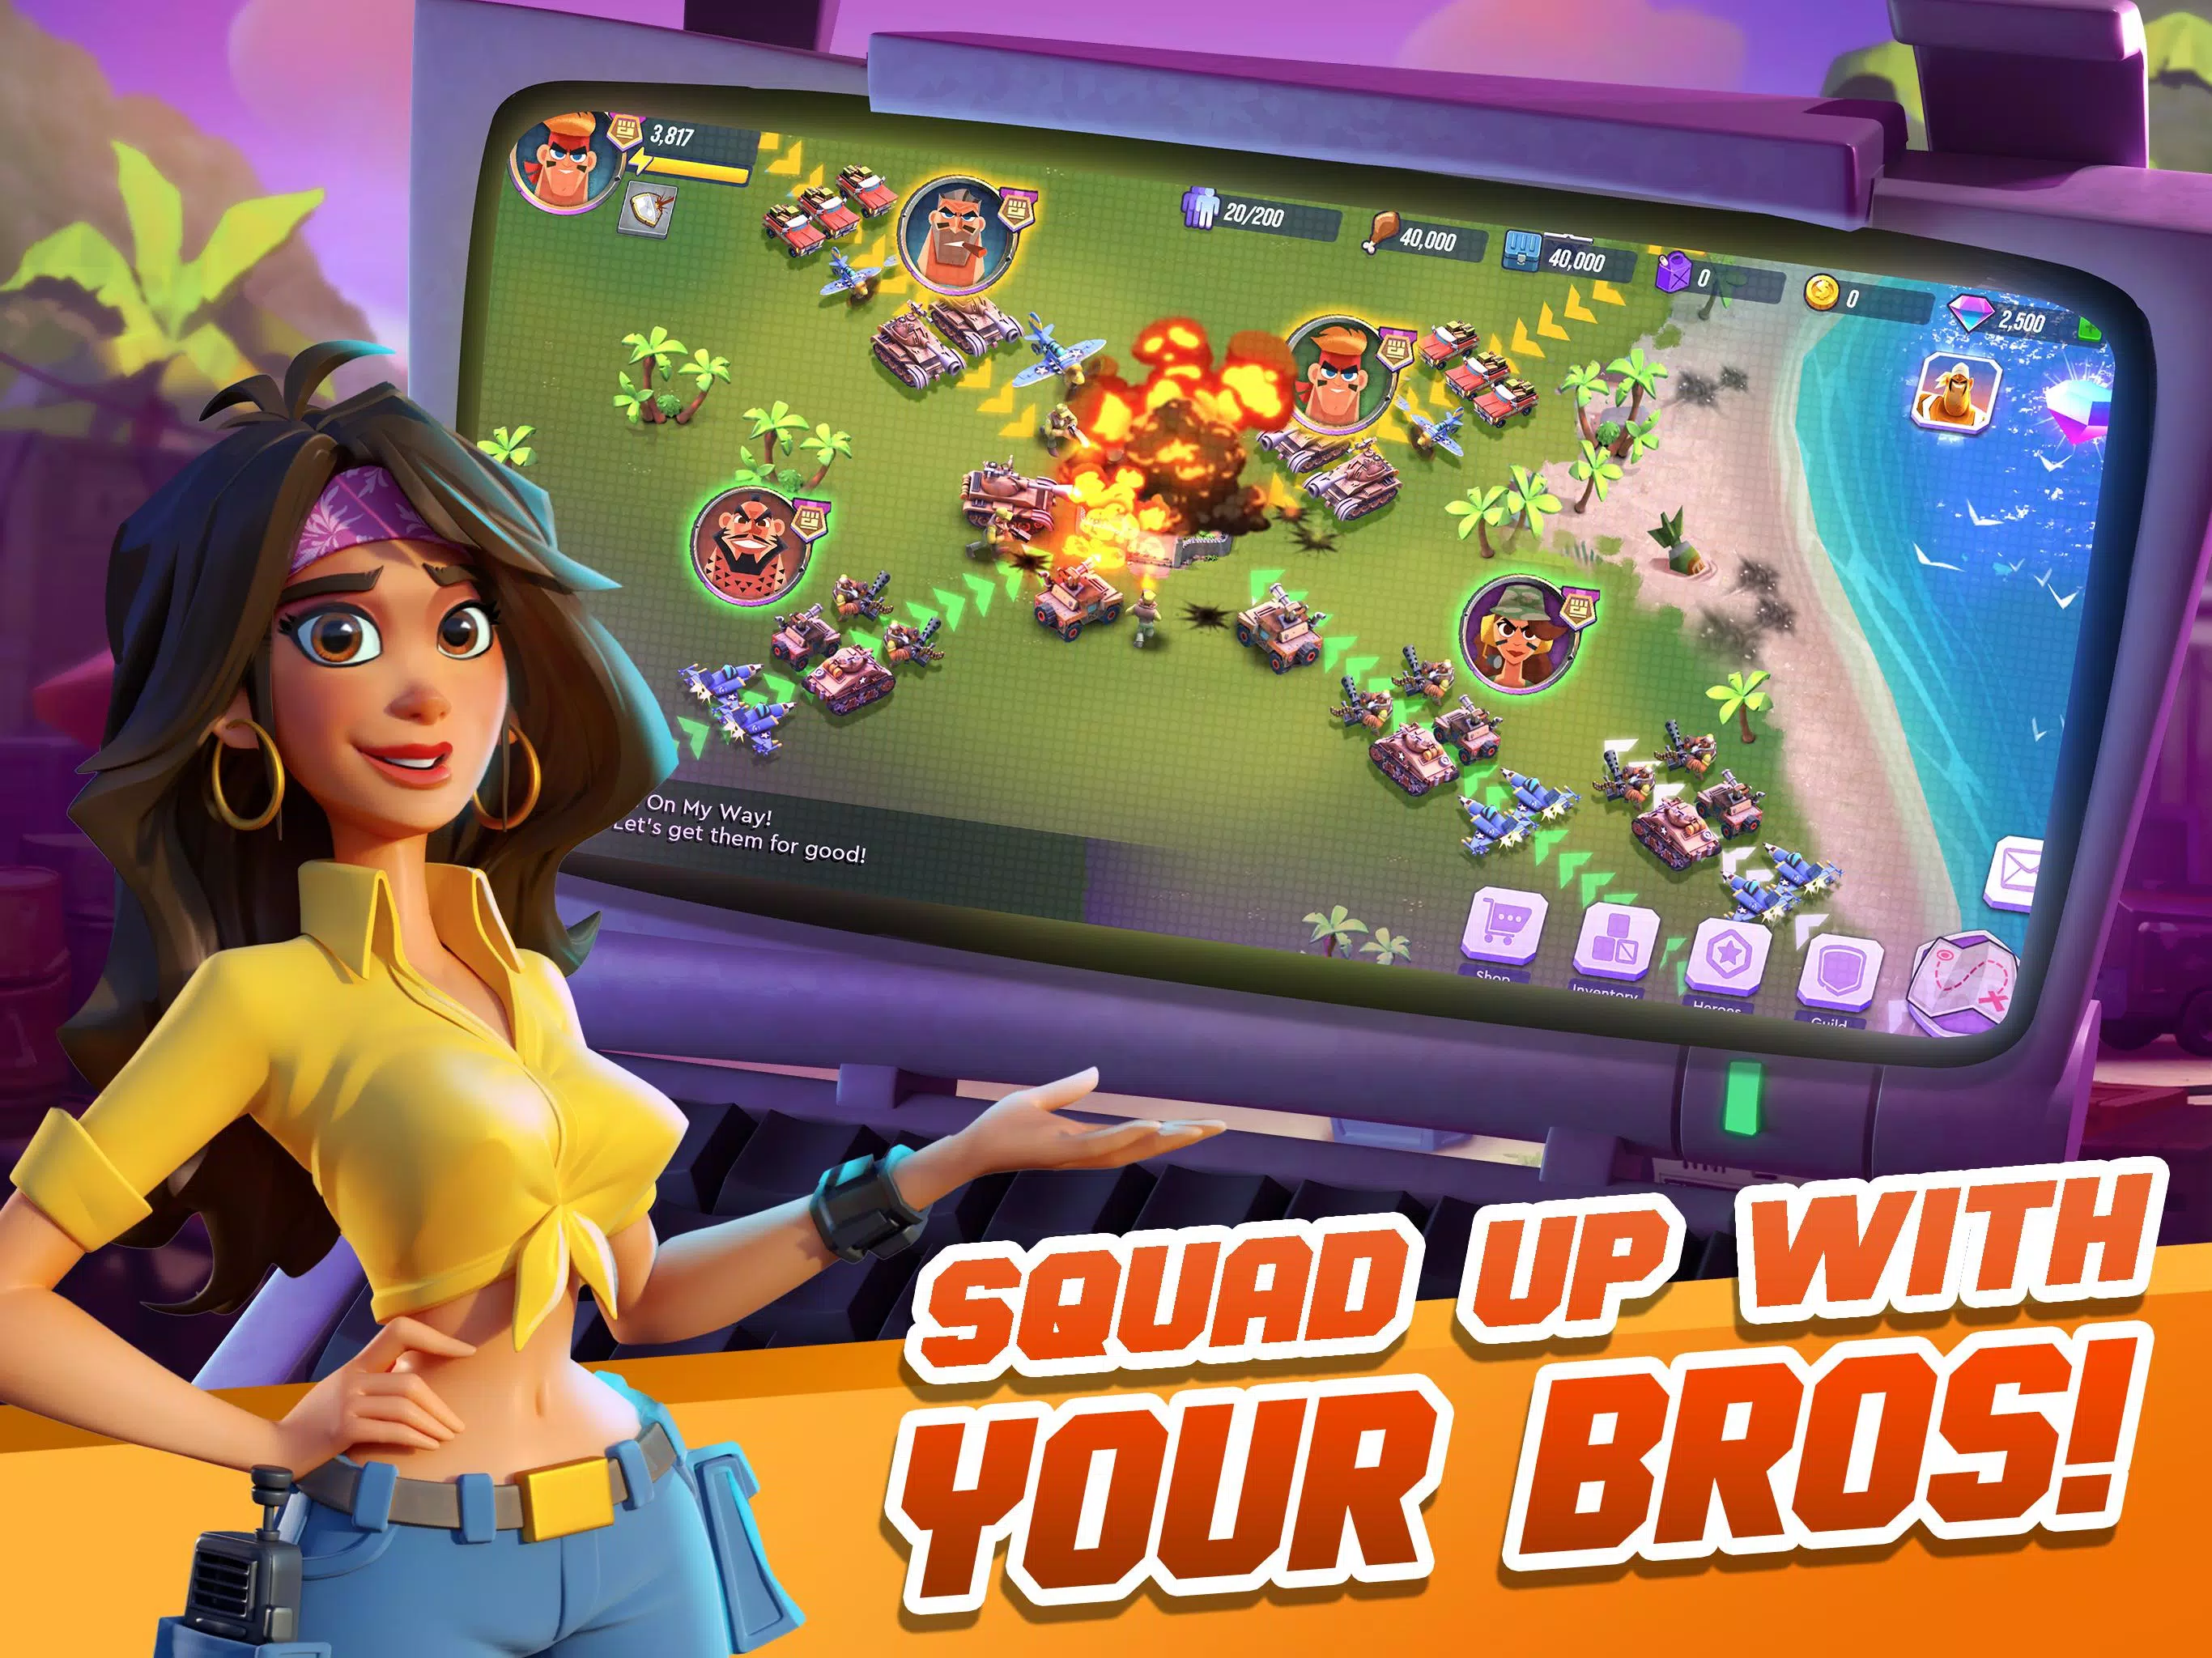 Hardhead Squad: MMO War is a strategy game for iOS and Android